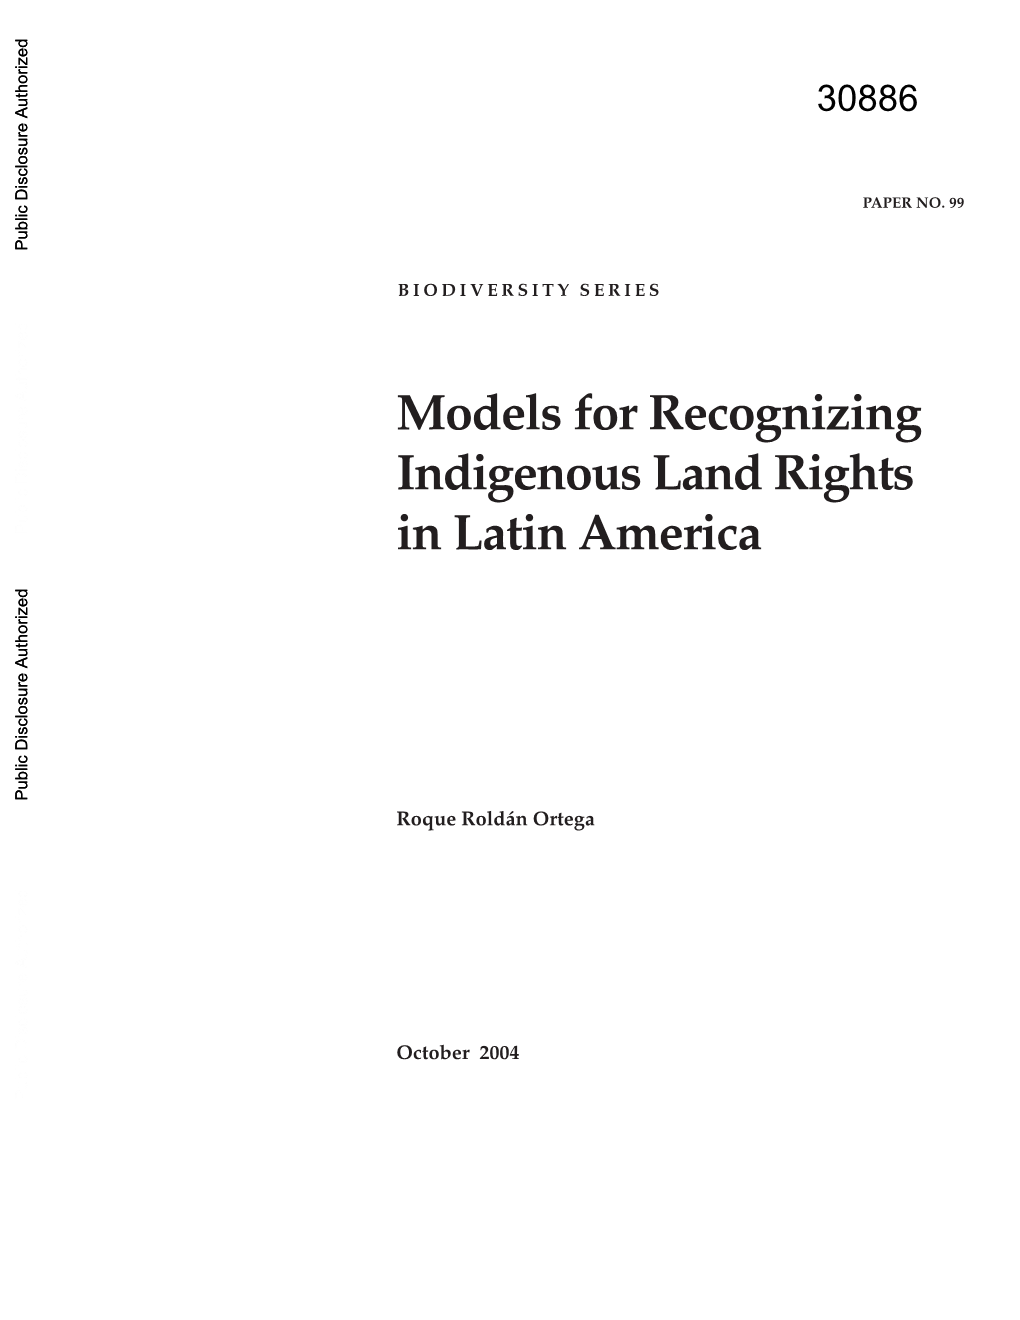 Models for Recognizing Indigenous Land Rights